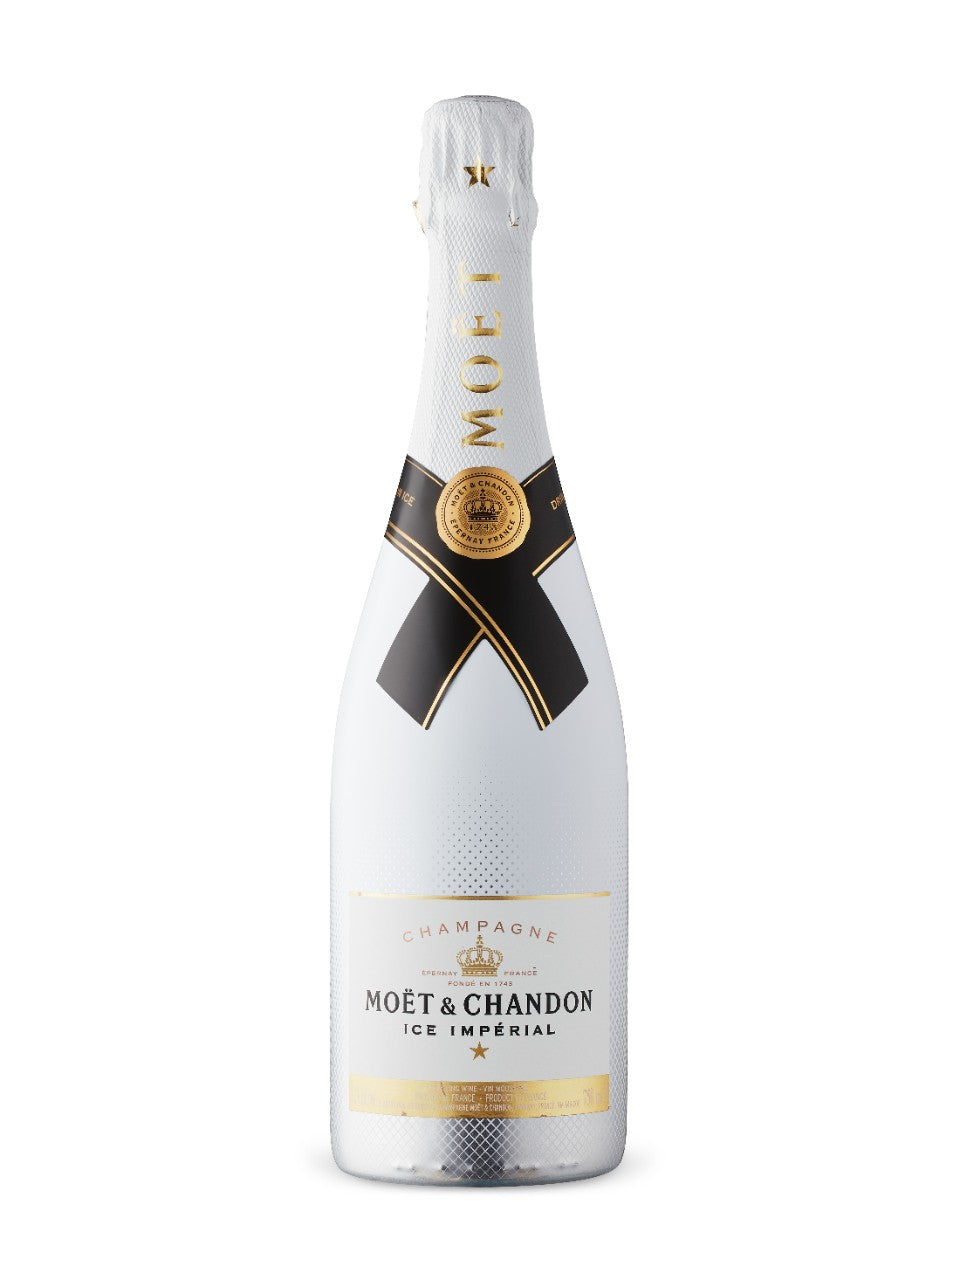 Moet & Chandon Ice Imperial Champagne 750 ml bottle